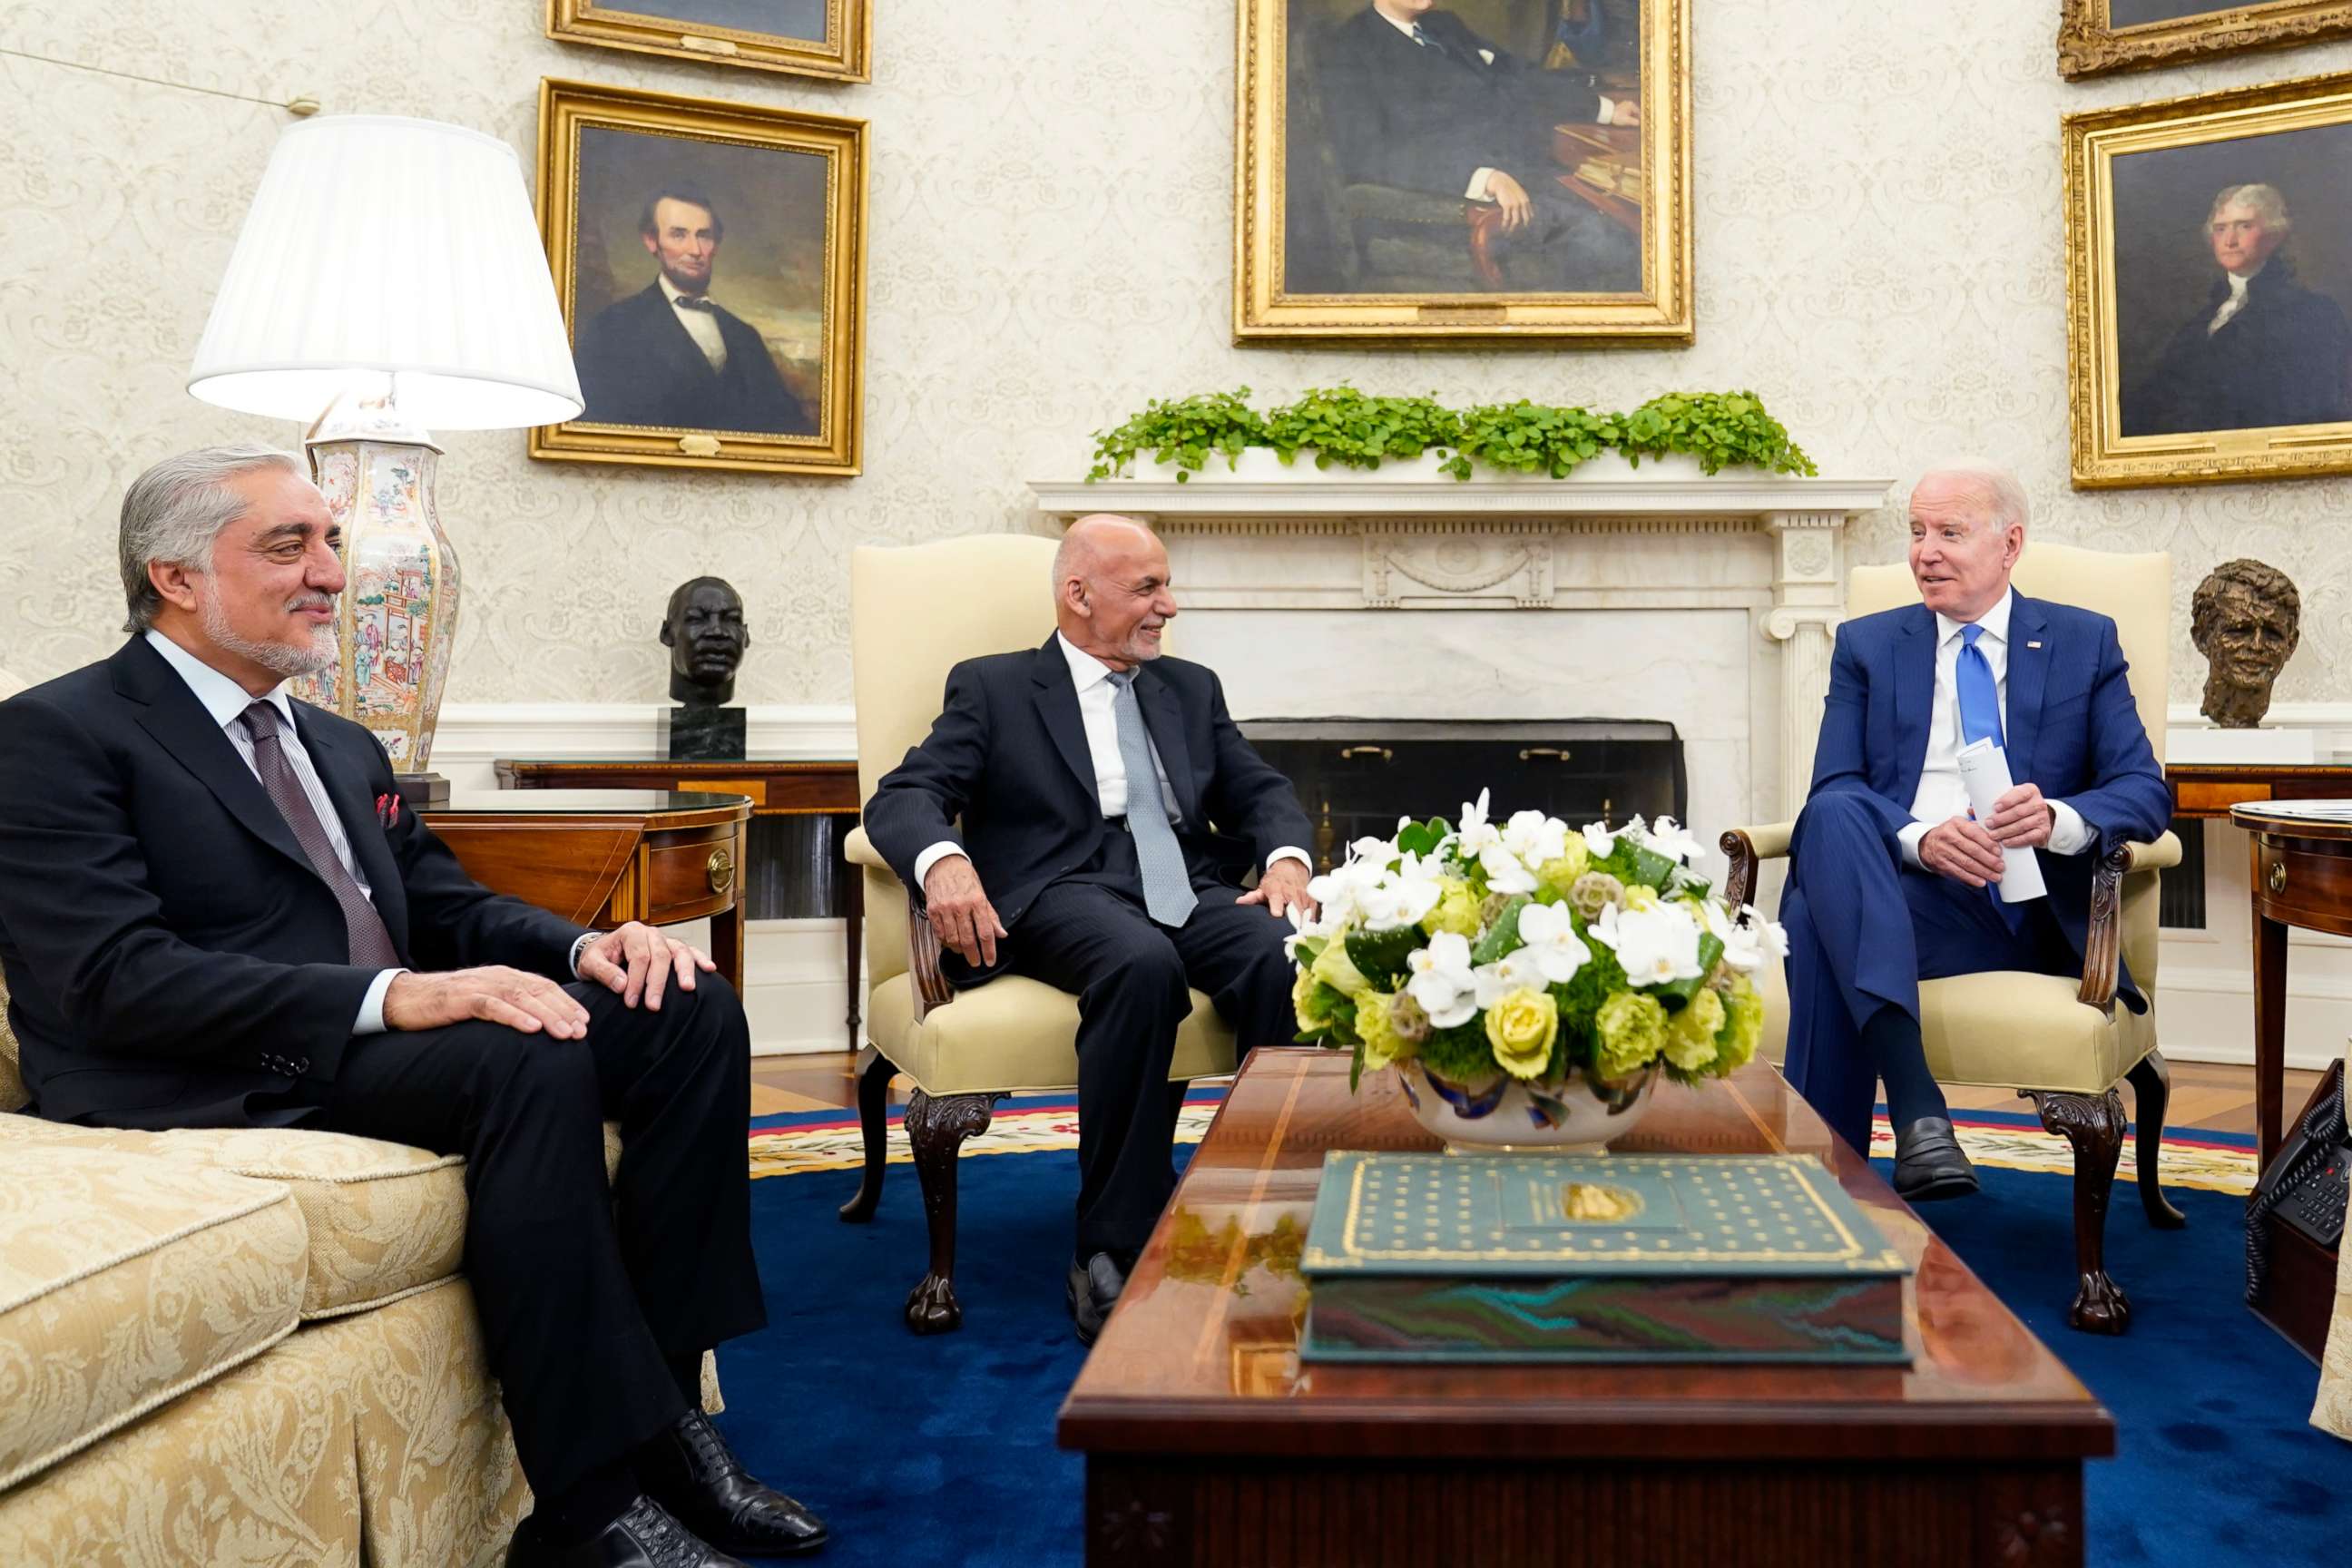 PHOTO: President Joe Biden meets with Afghan President Ashraf Ghani in the Oval Office of the White House in Washington, June 25, 2021.